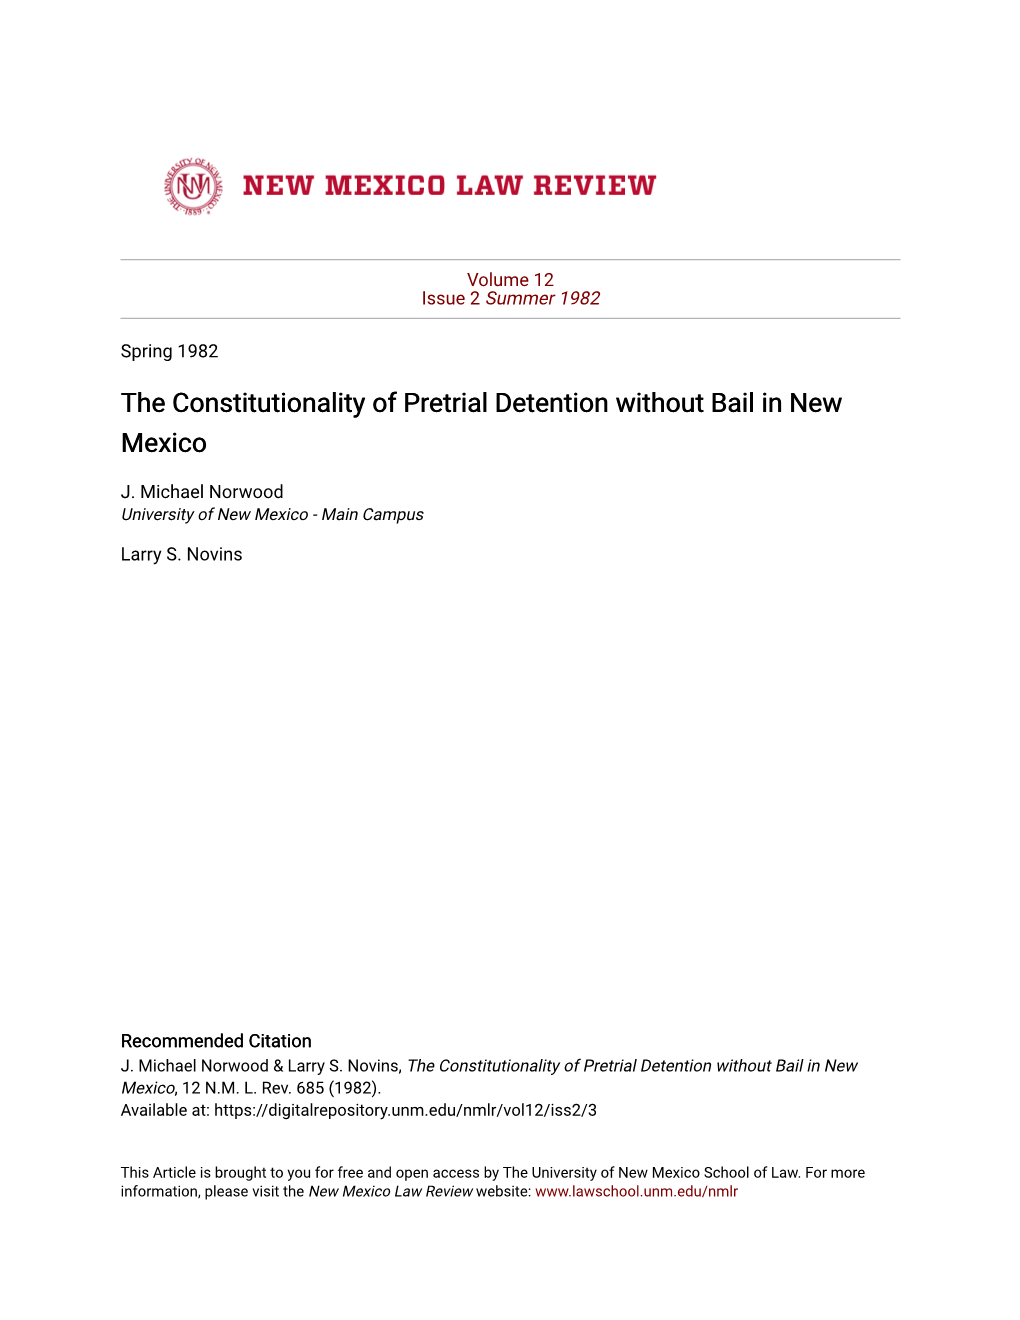 The Constitutionality of Pretrial Detention Without Bail in New Mexico